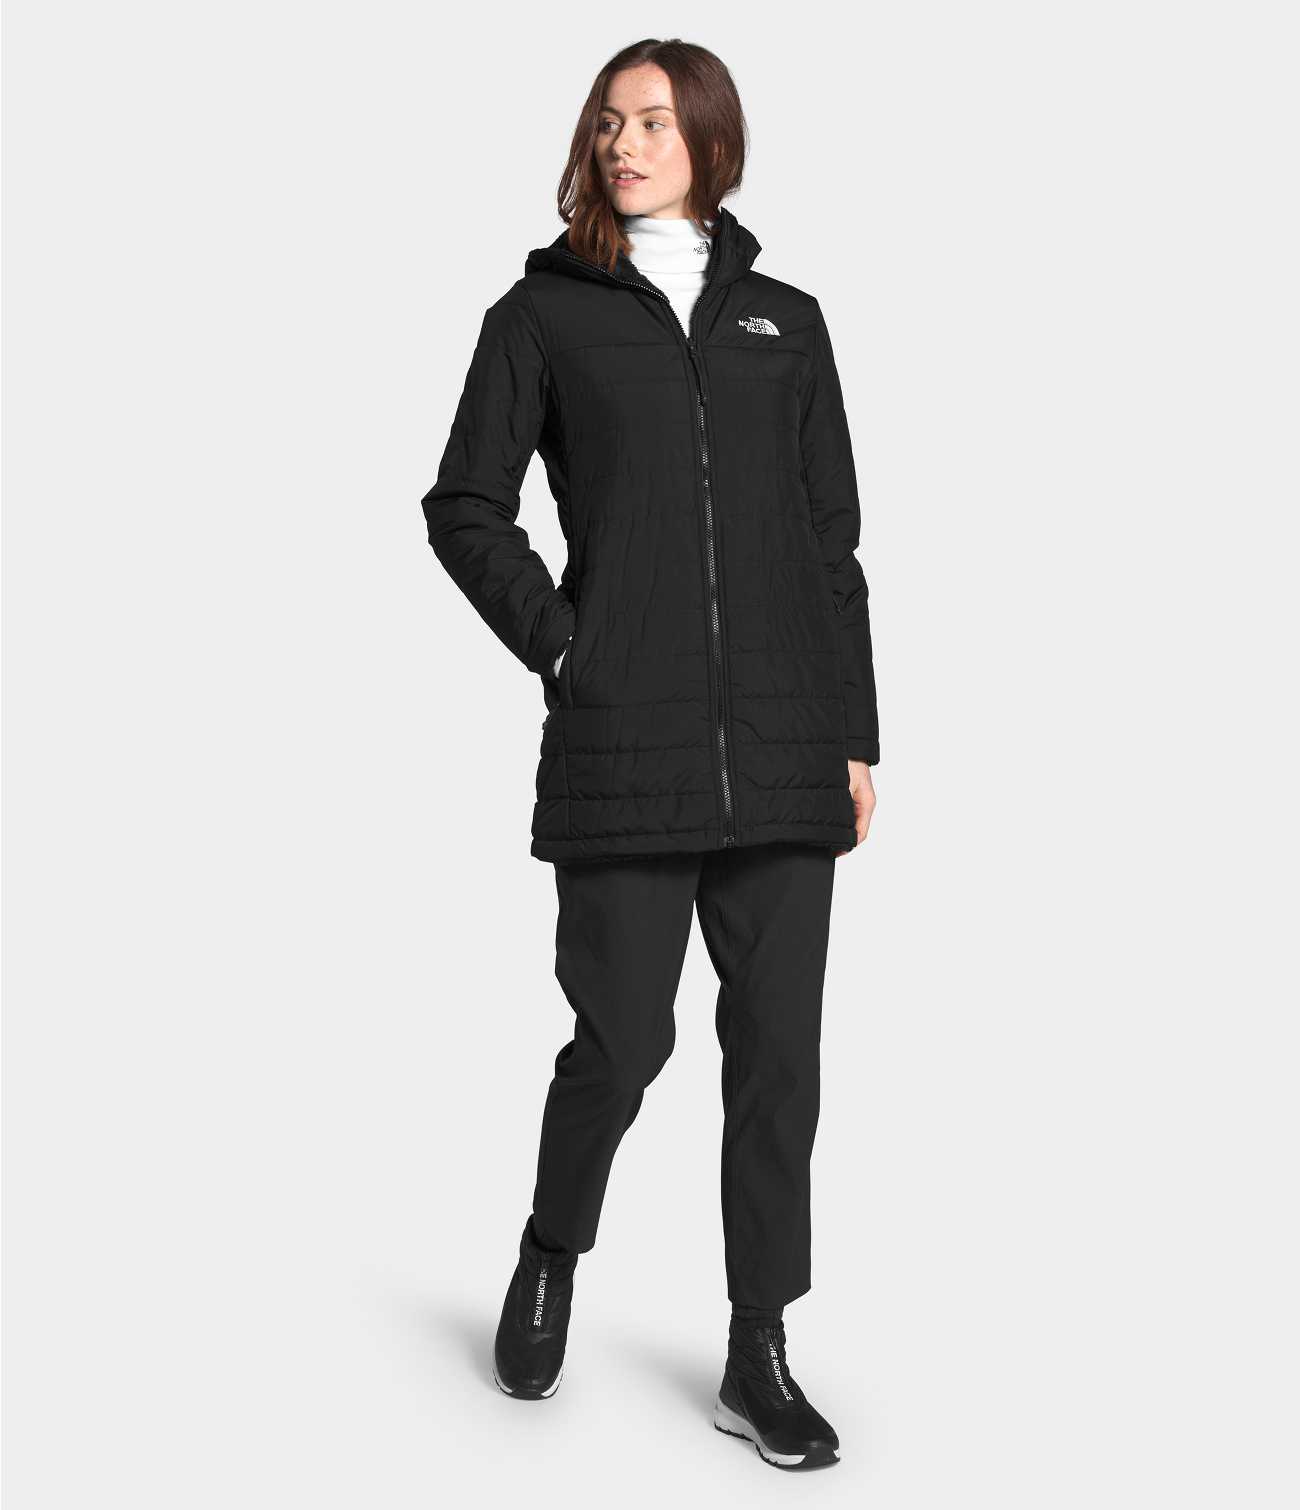 WOMEN'S MOSSBUD INSULATED REVERSIBLE PARKA, The North Face